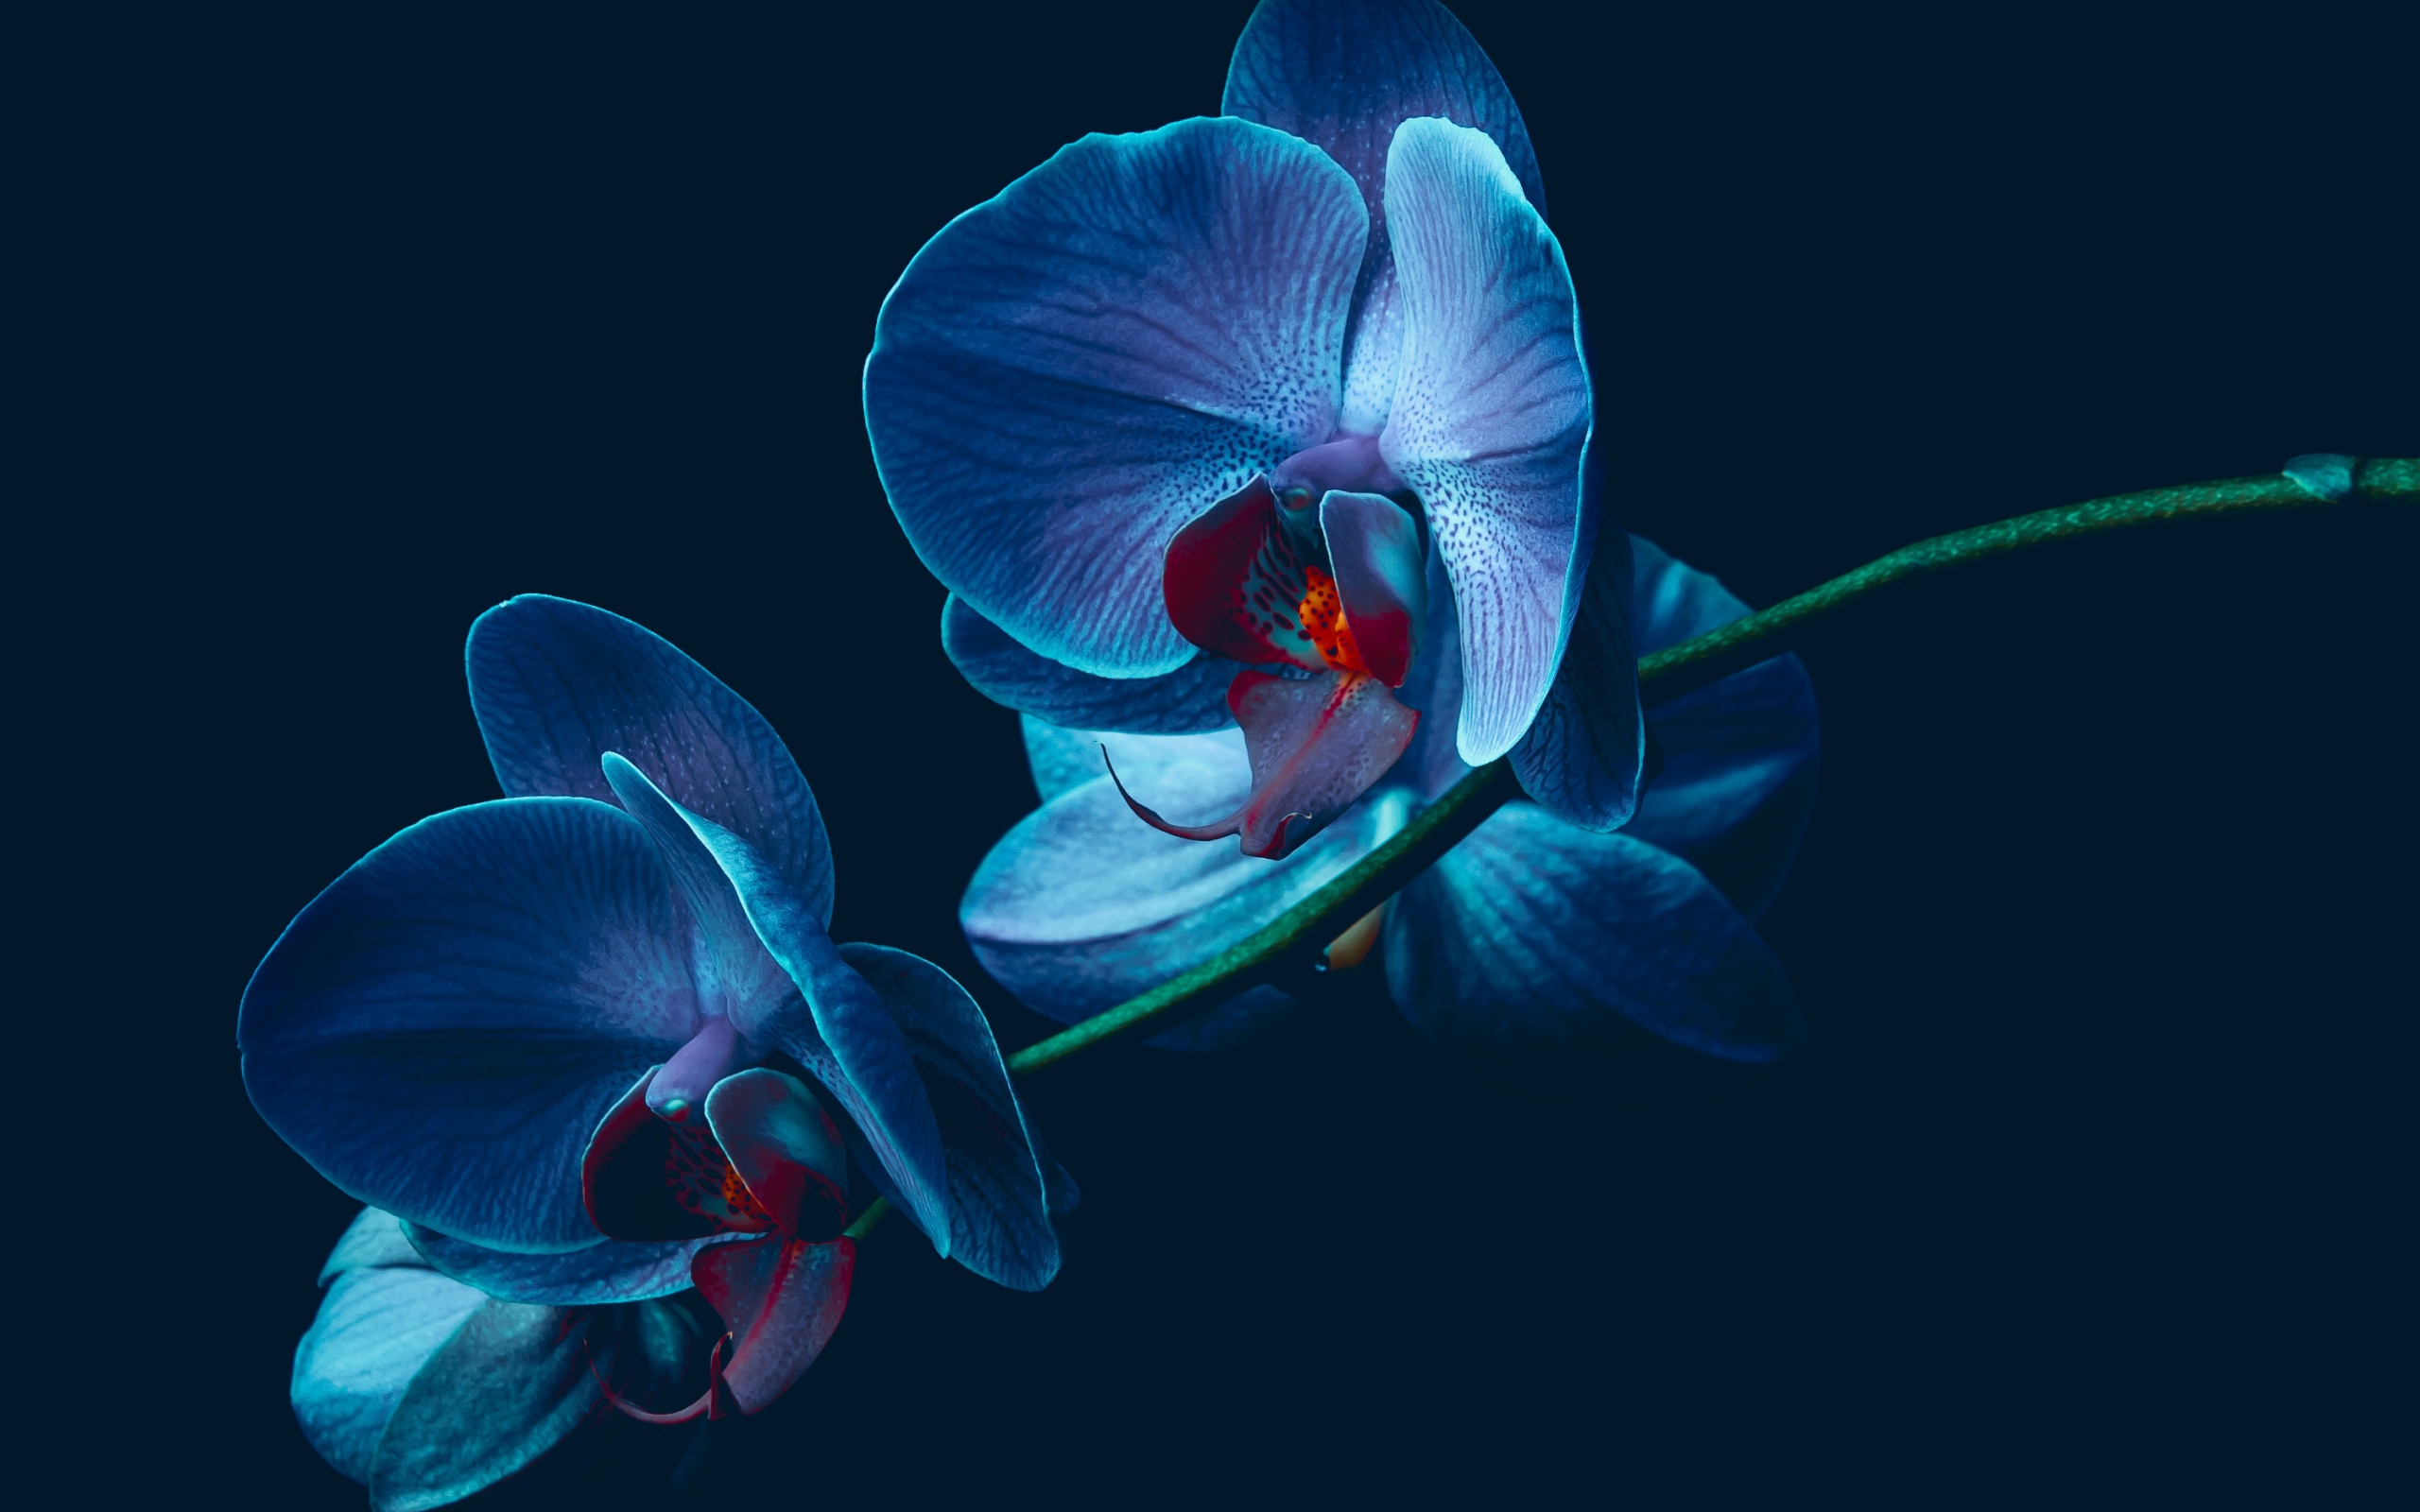 Orchid HD Wallpaper | Background Image | 2560x1600 | ID ...